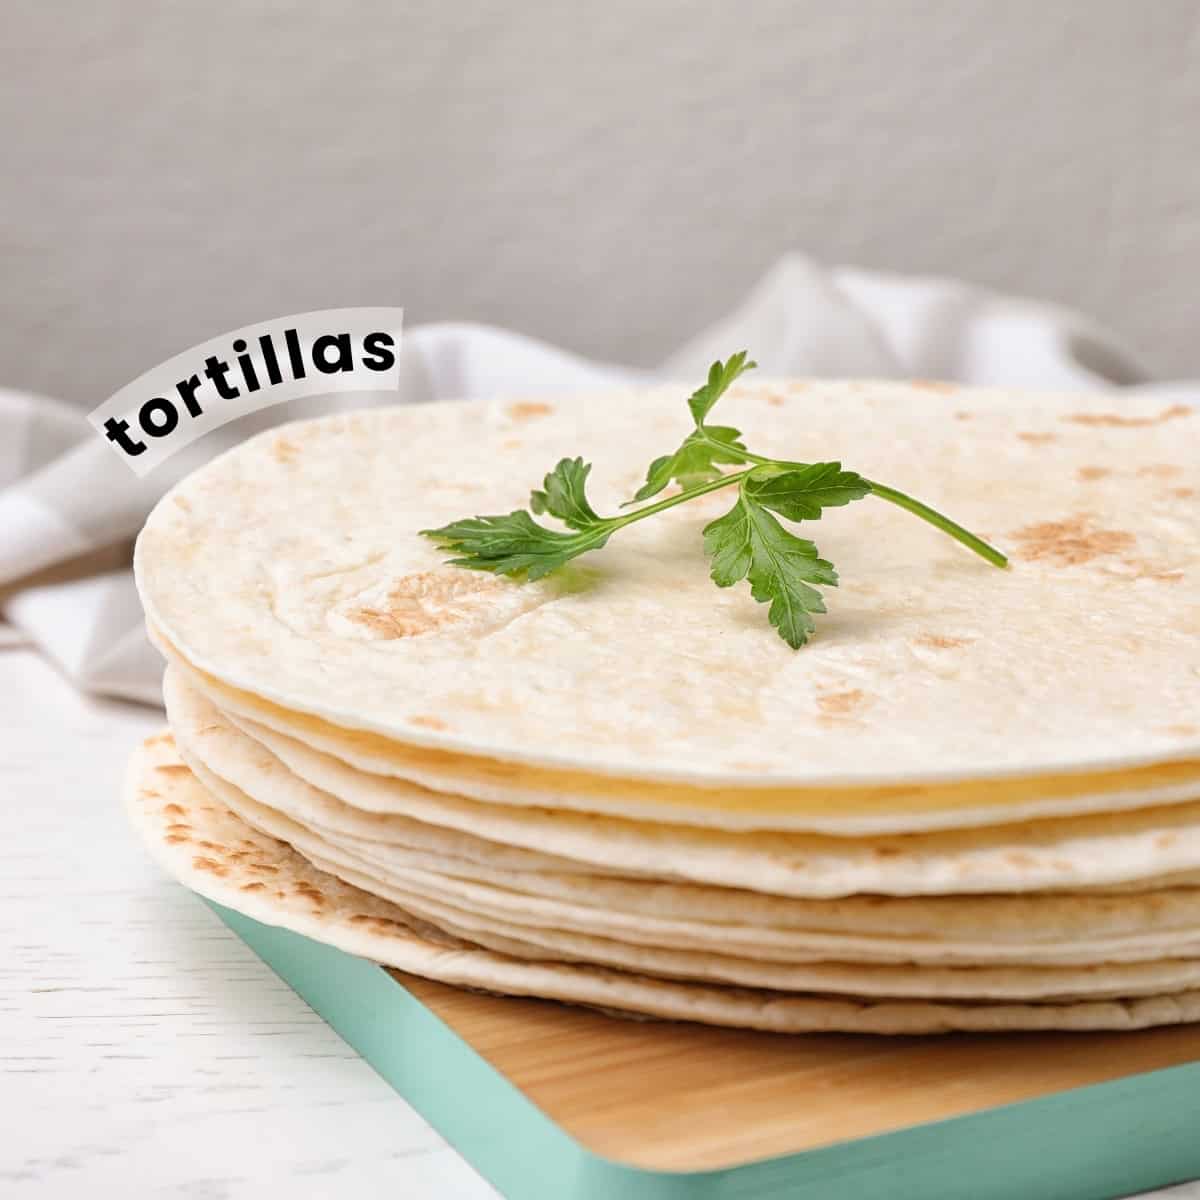 A stack of flour tortillas topped with a garnish of coriander on a wooden chopping board.